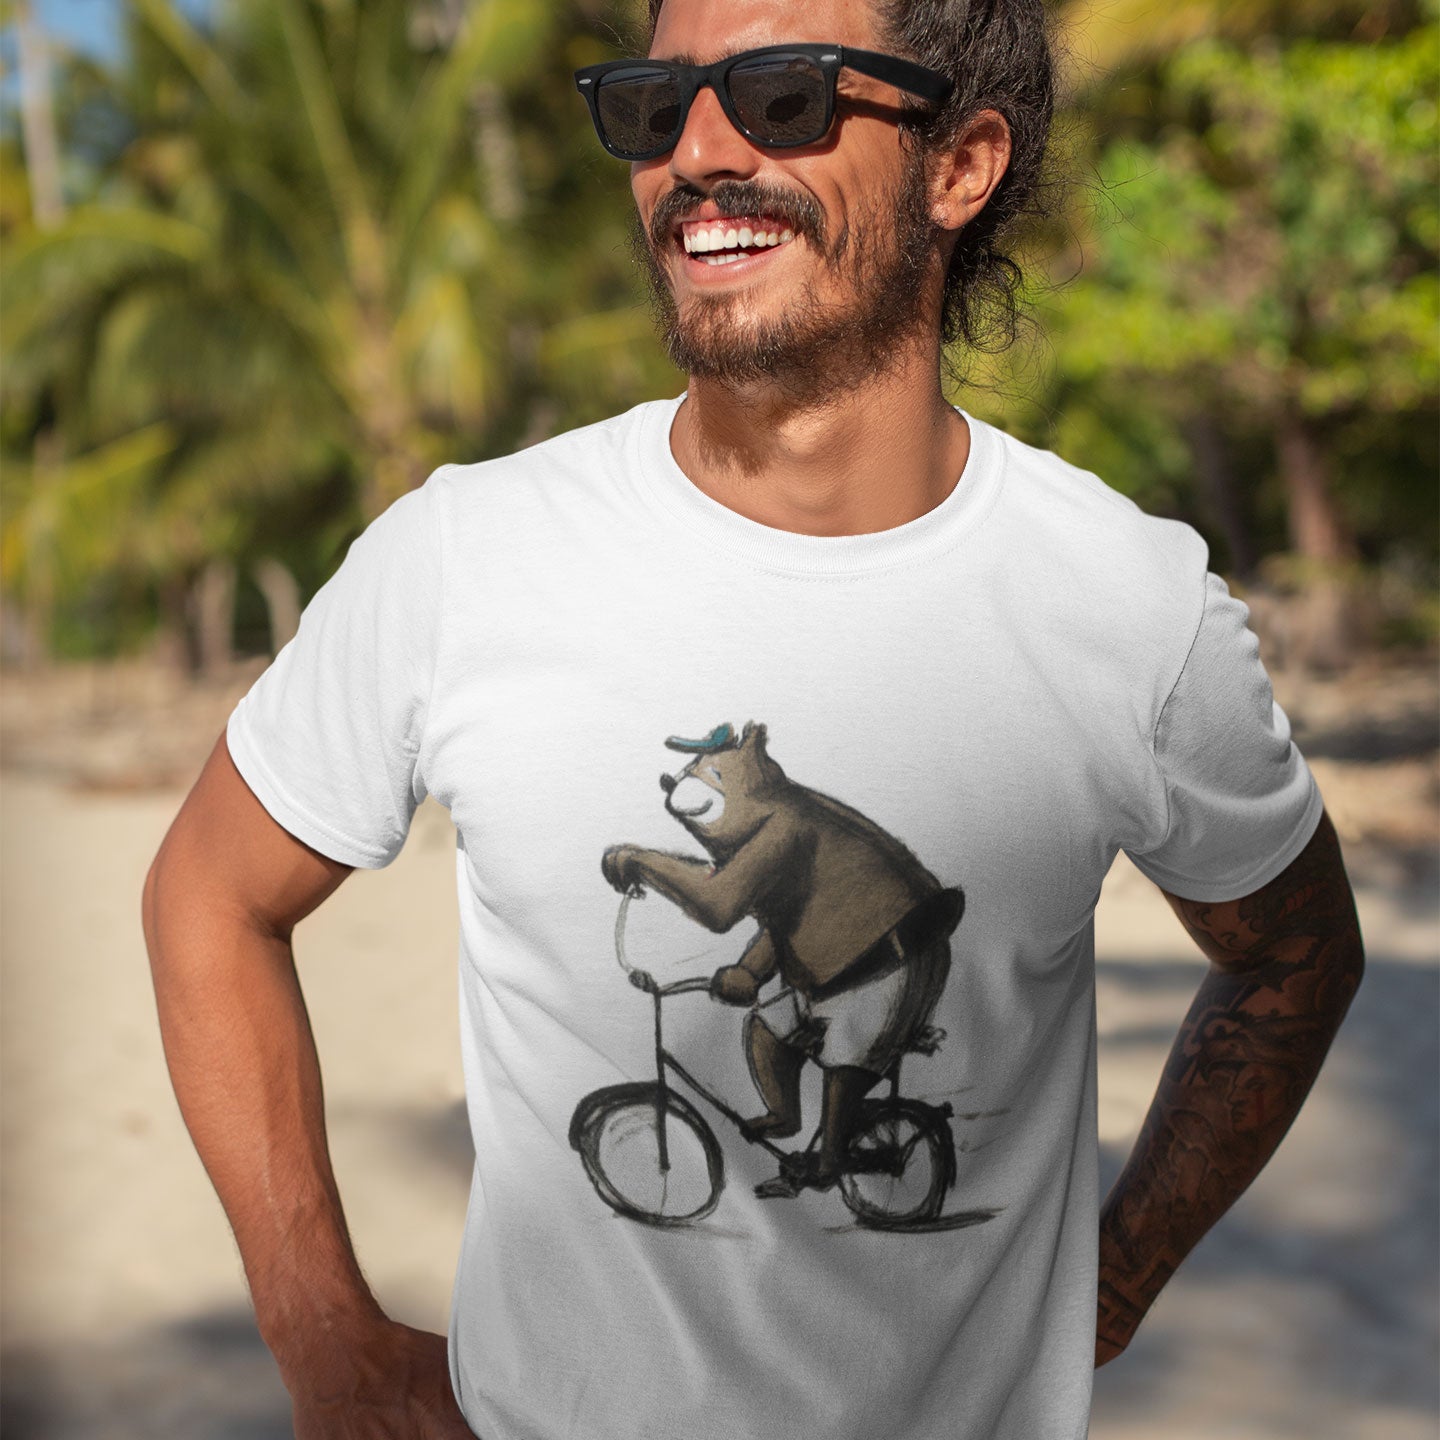 Man wearinga white t-shirt with a bear in shorts and cap  riding a bike